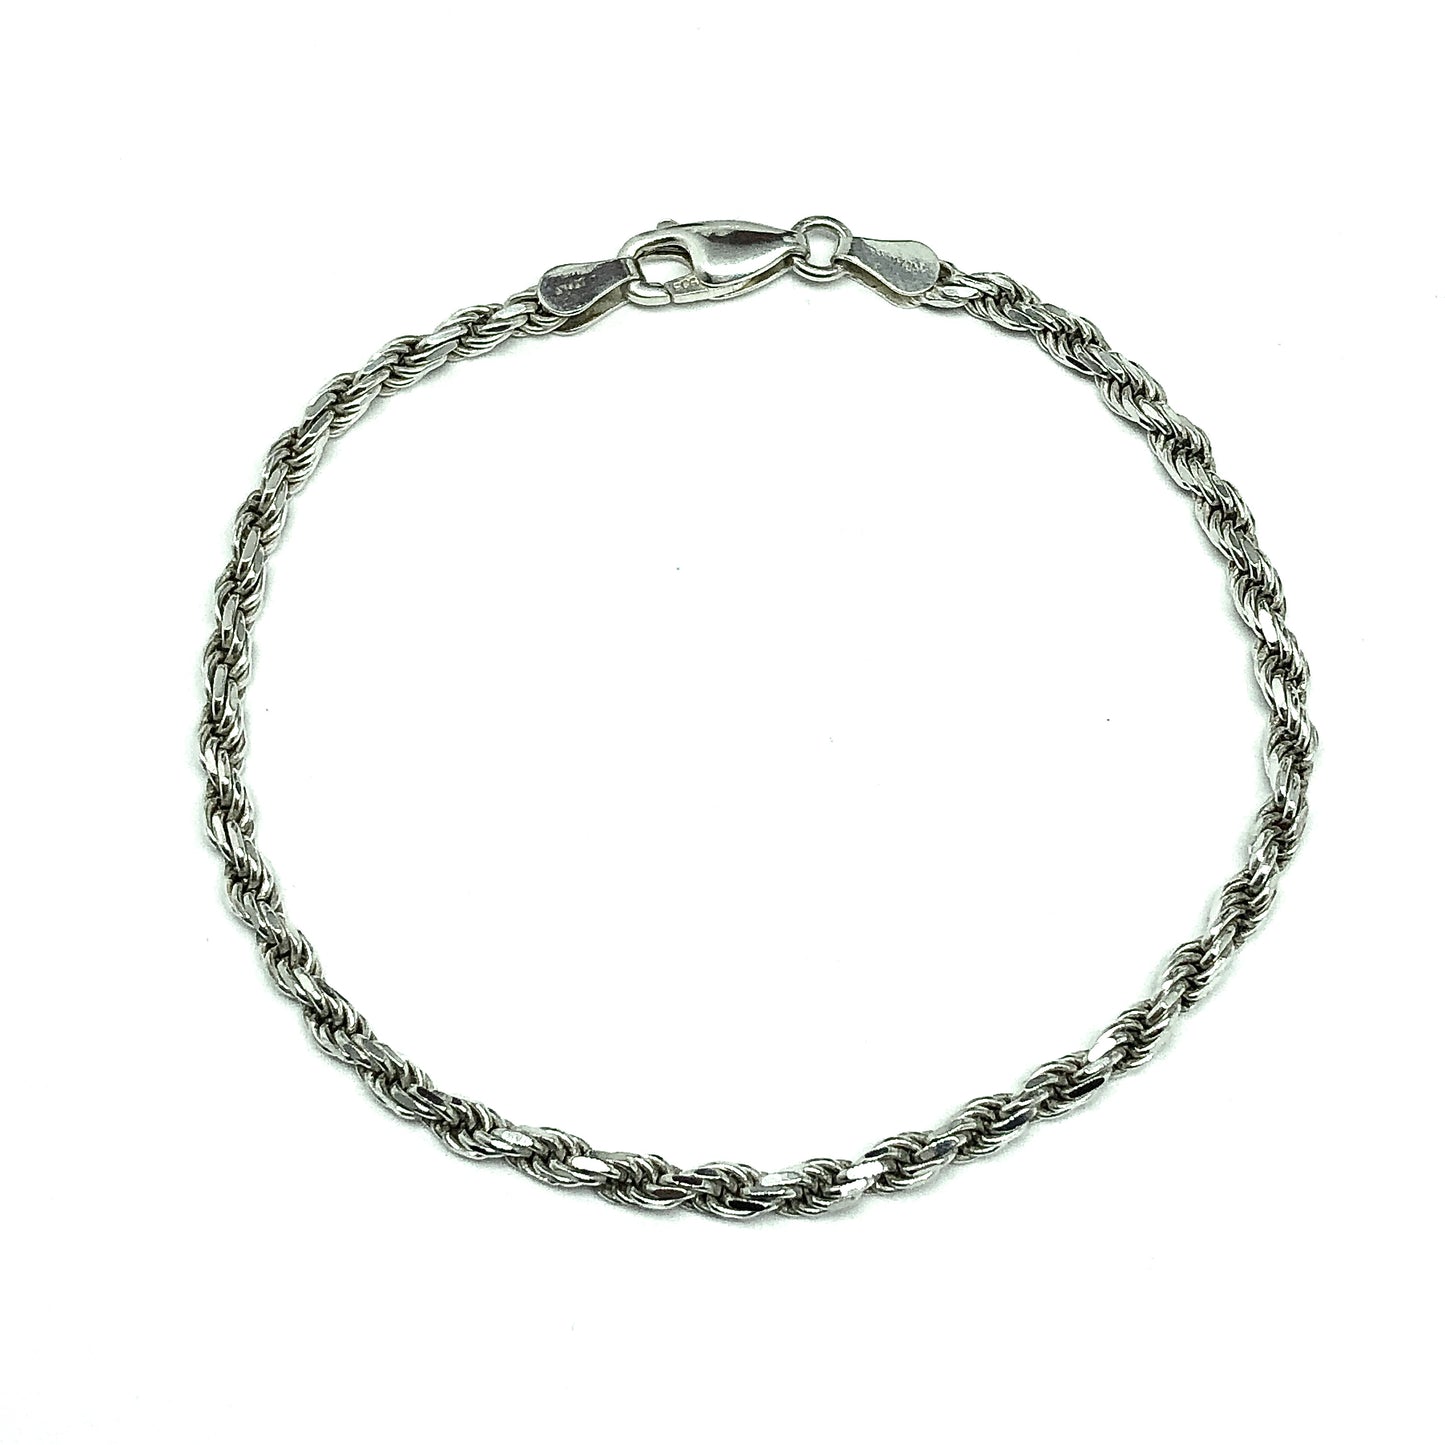 Rope Chain Bracelet Sterling Silver 7.25"